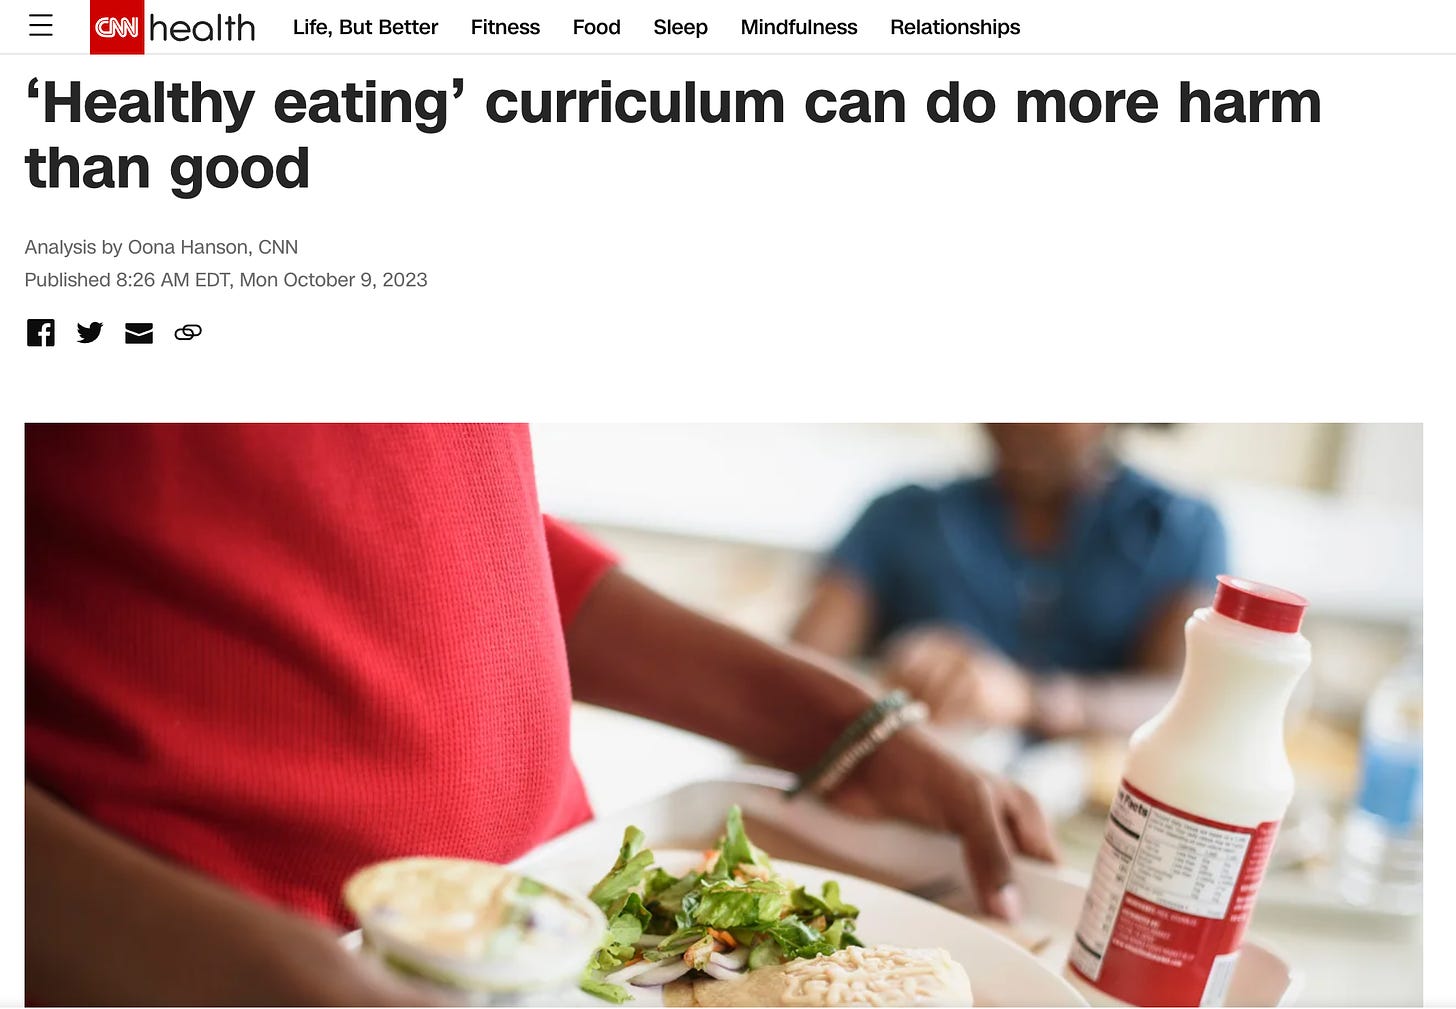 CNN headline read "Healthy eating" curriculum can do more harm than good and shows an image of a child carrying a school lunch tray